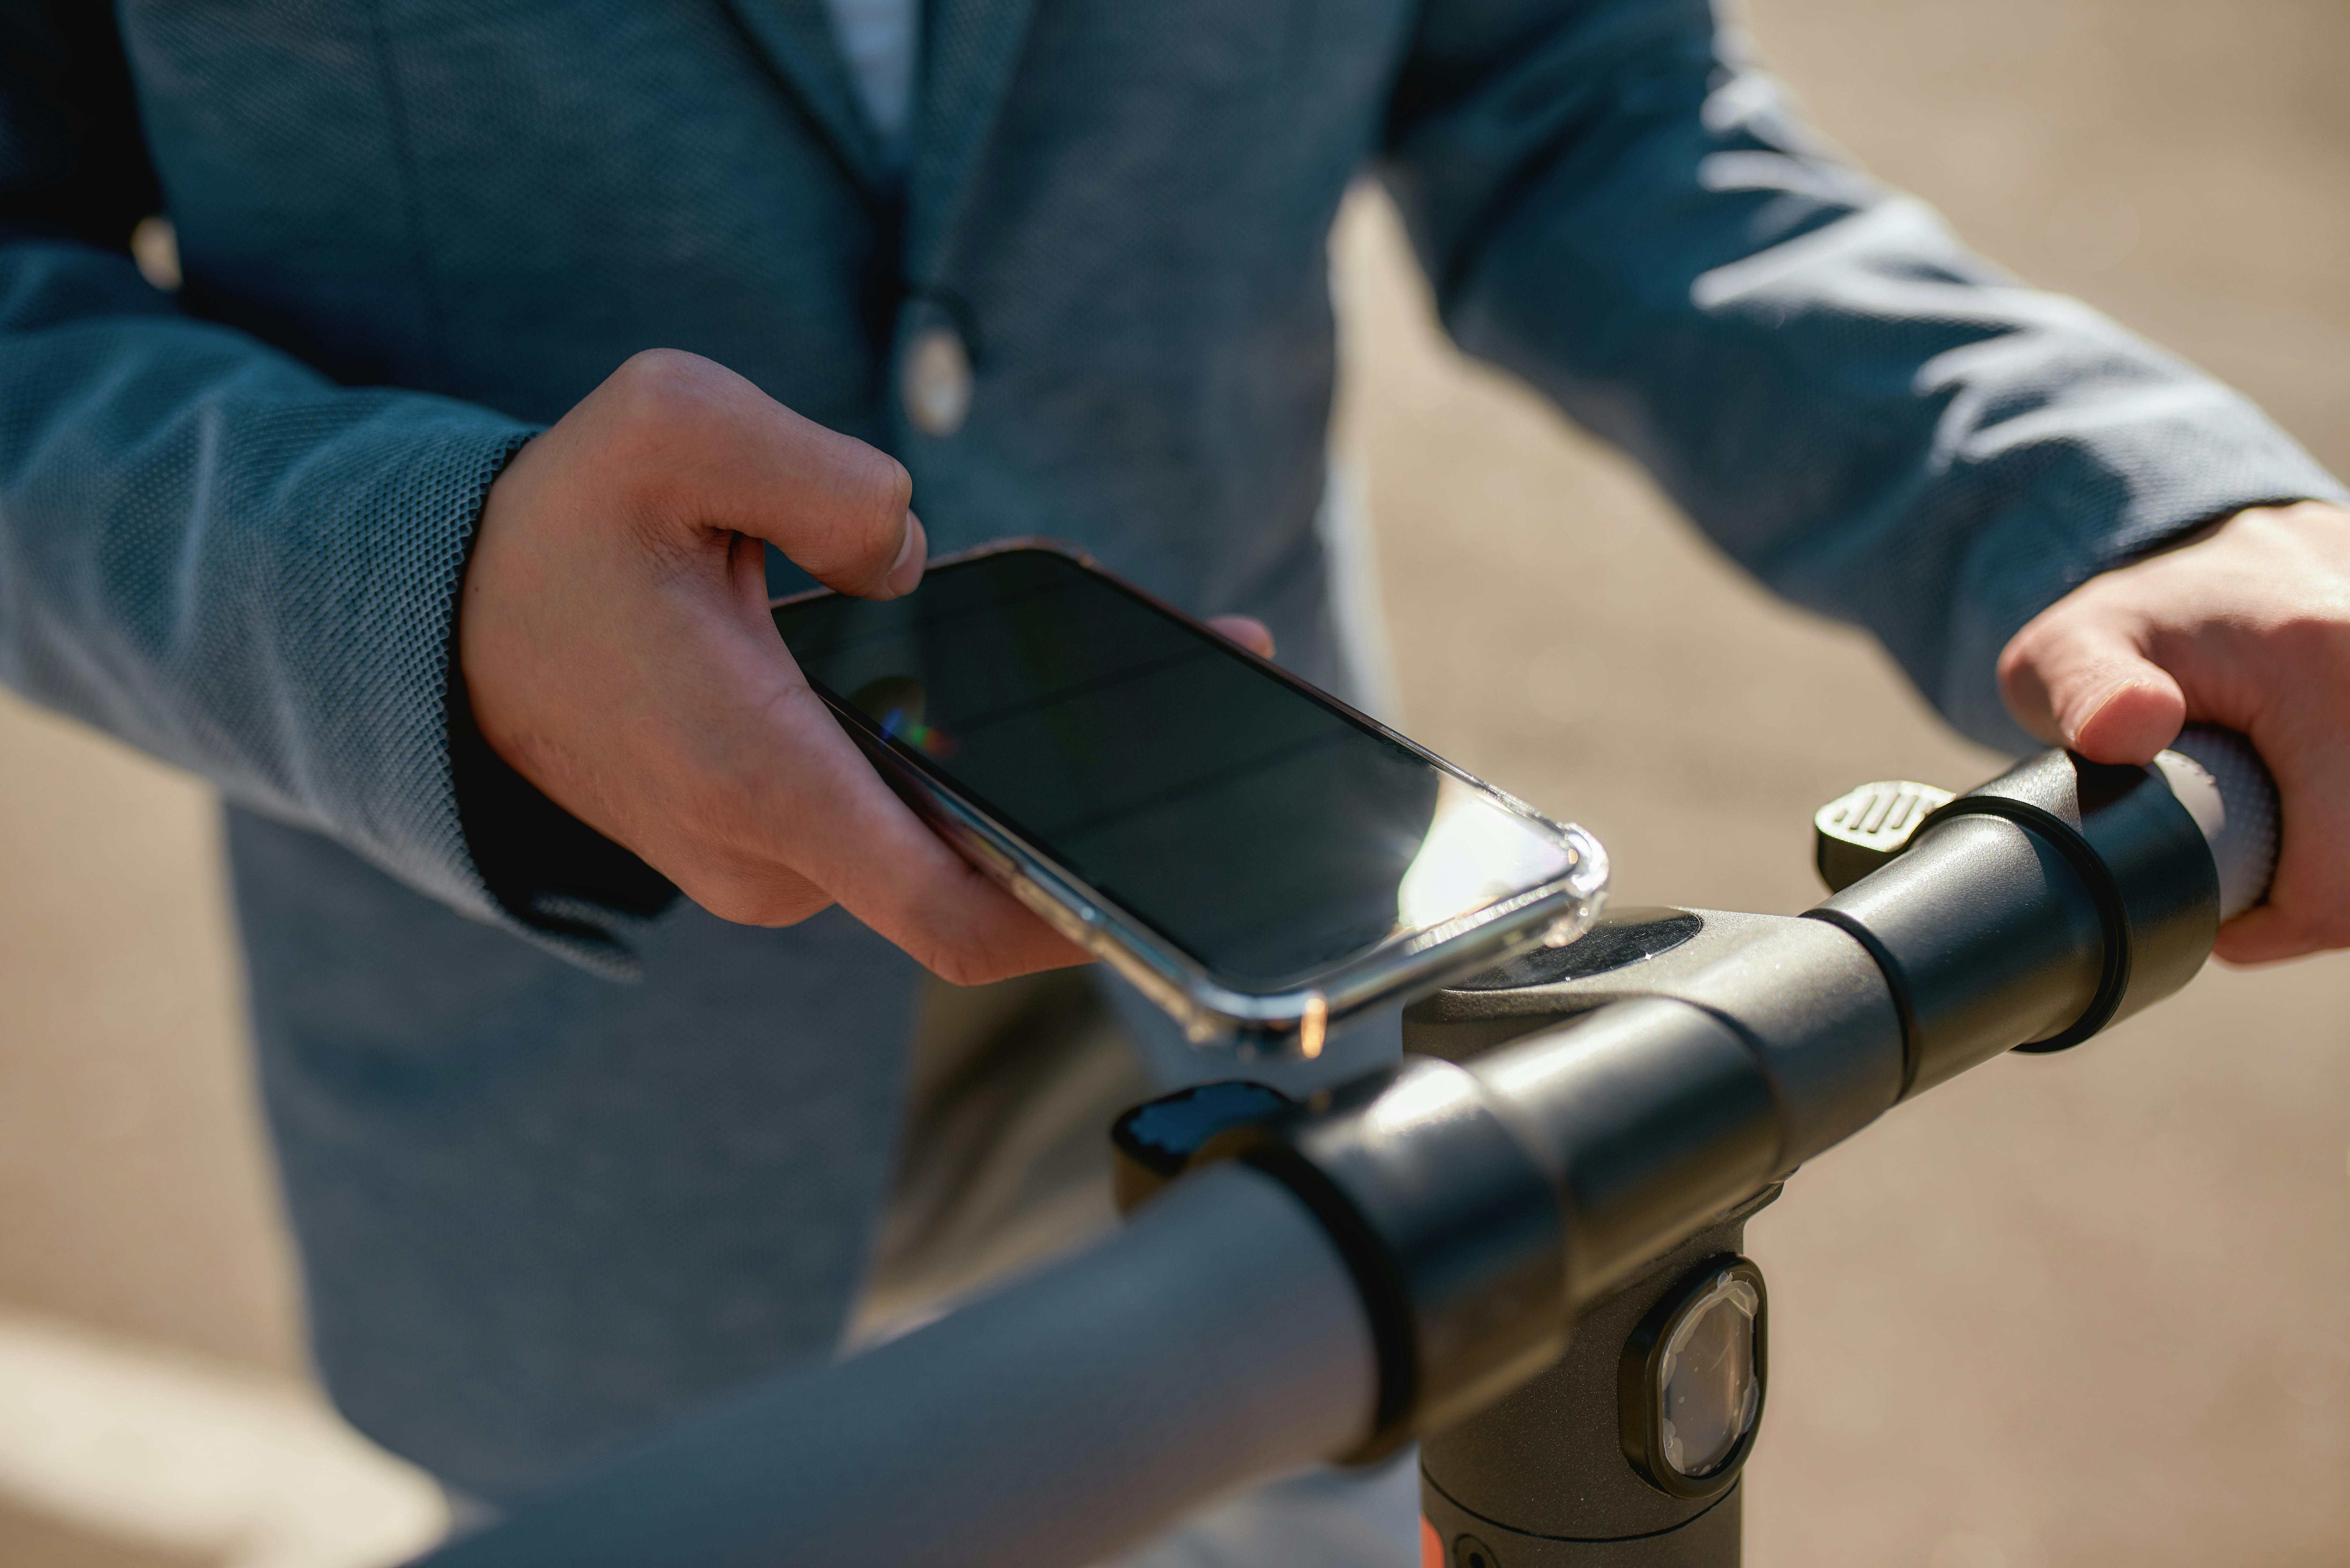 Many e-scooter share programs are rented and paid for using an app on your phone. 